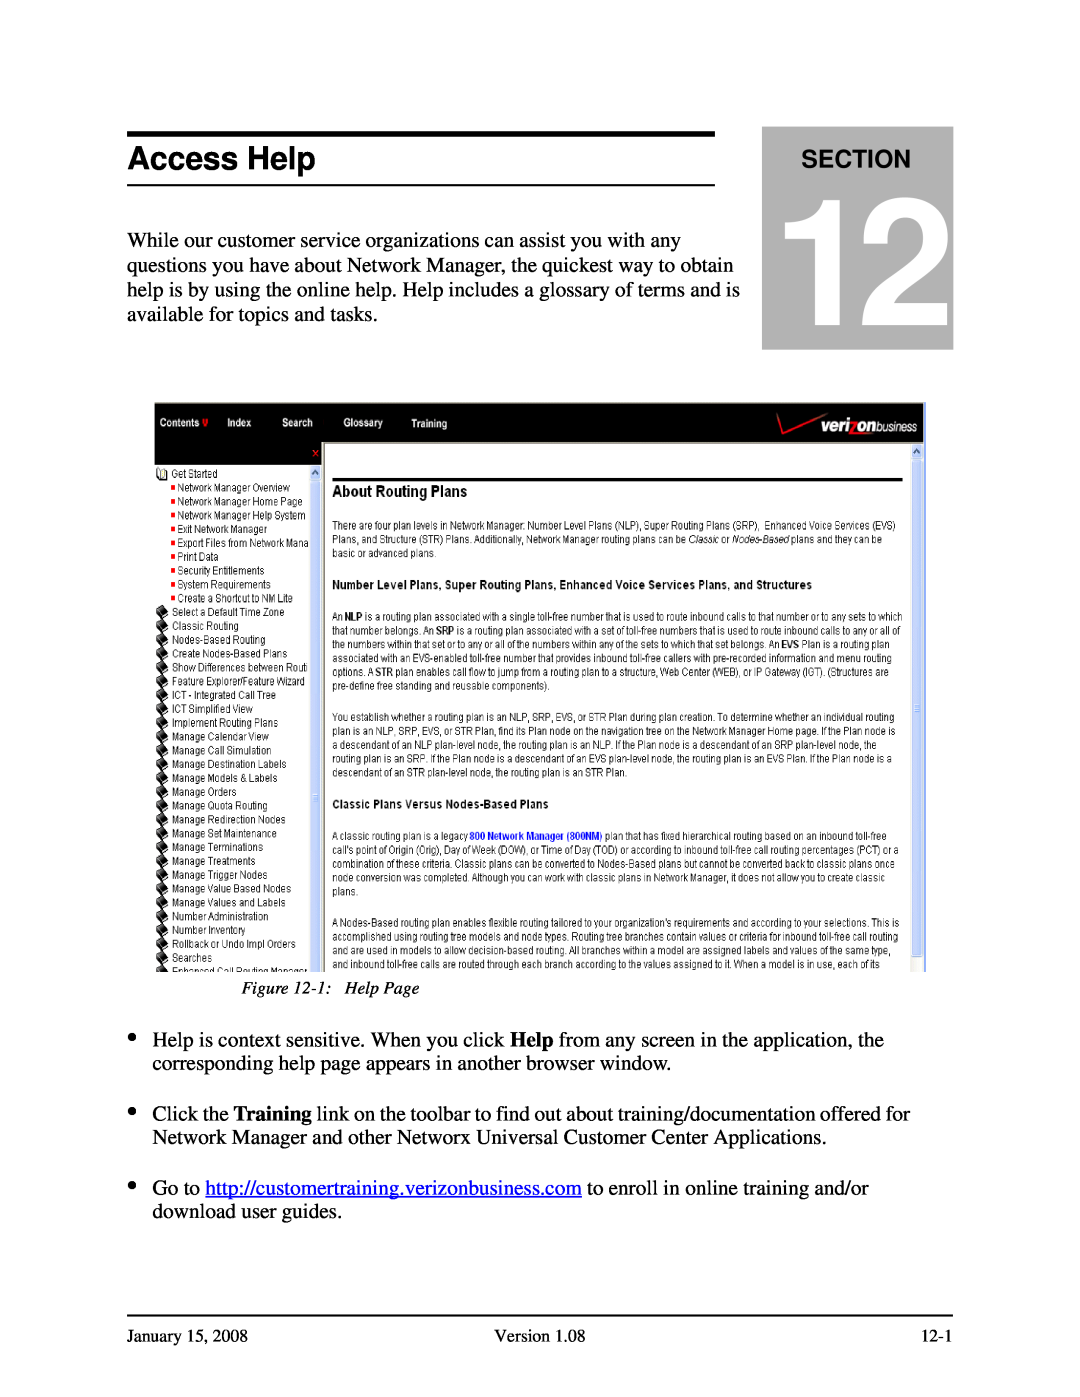 Verizon Network Manager Nodes manual Access Help, Section, 1 Help Page 